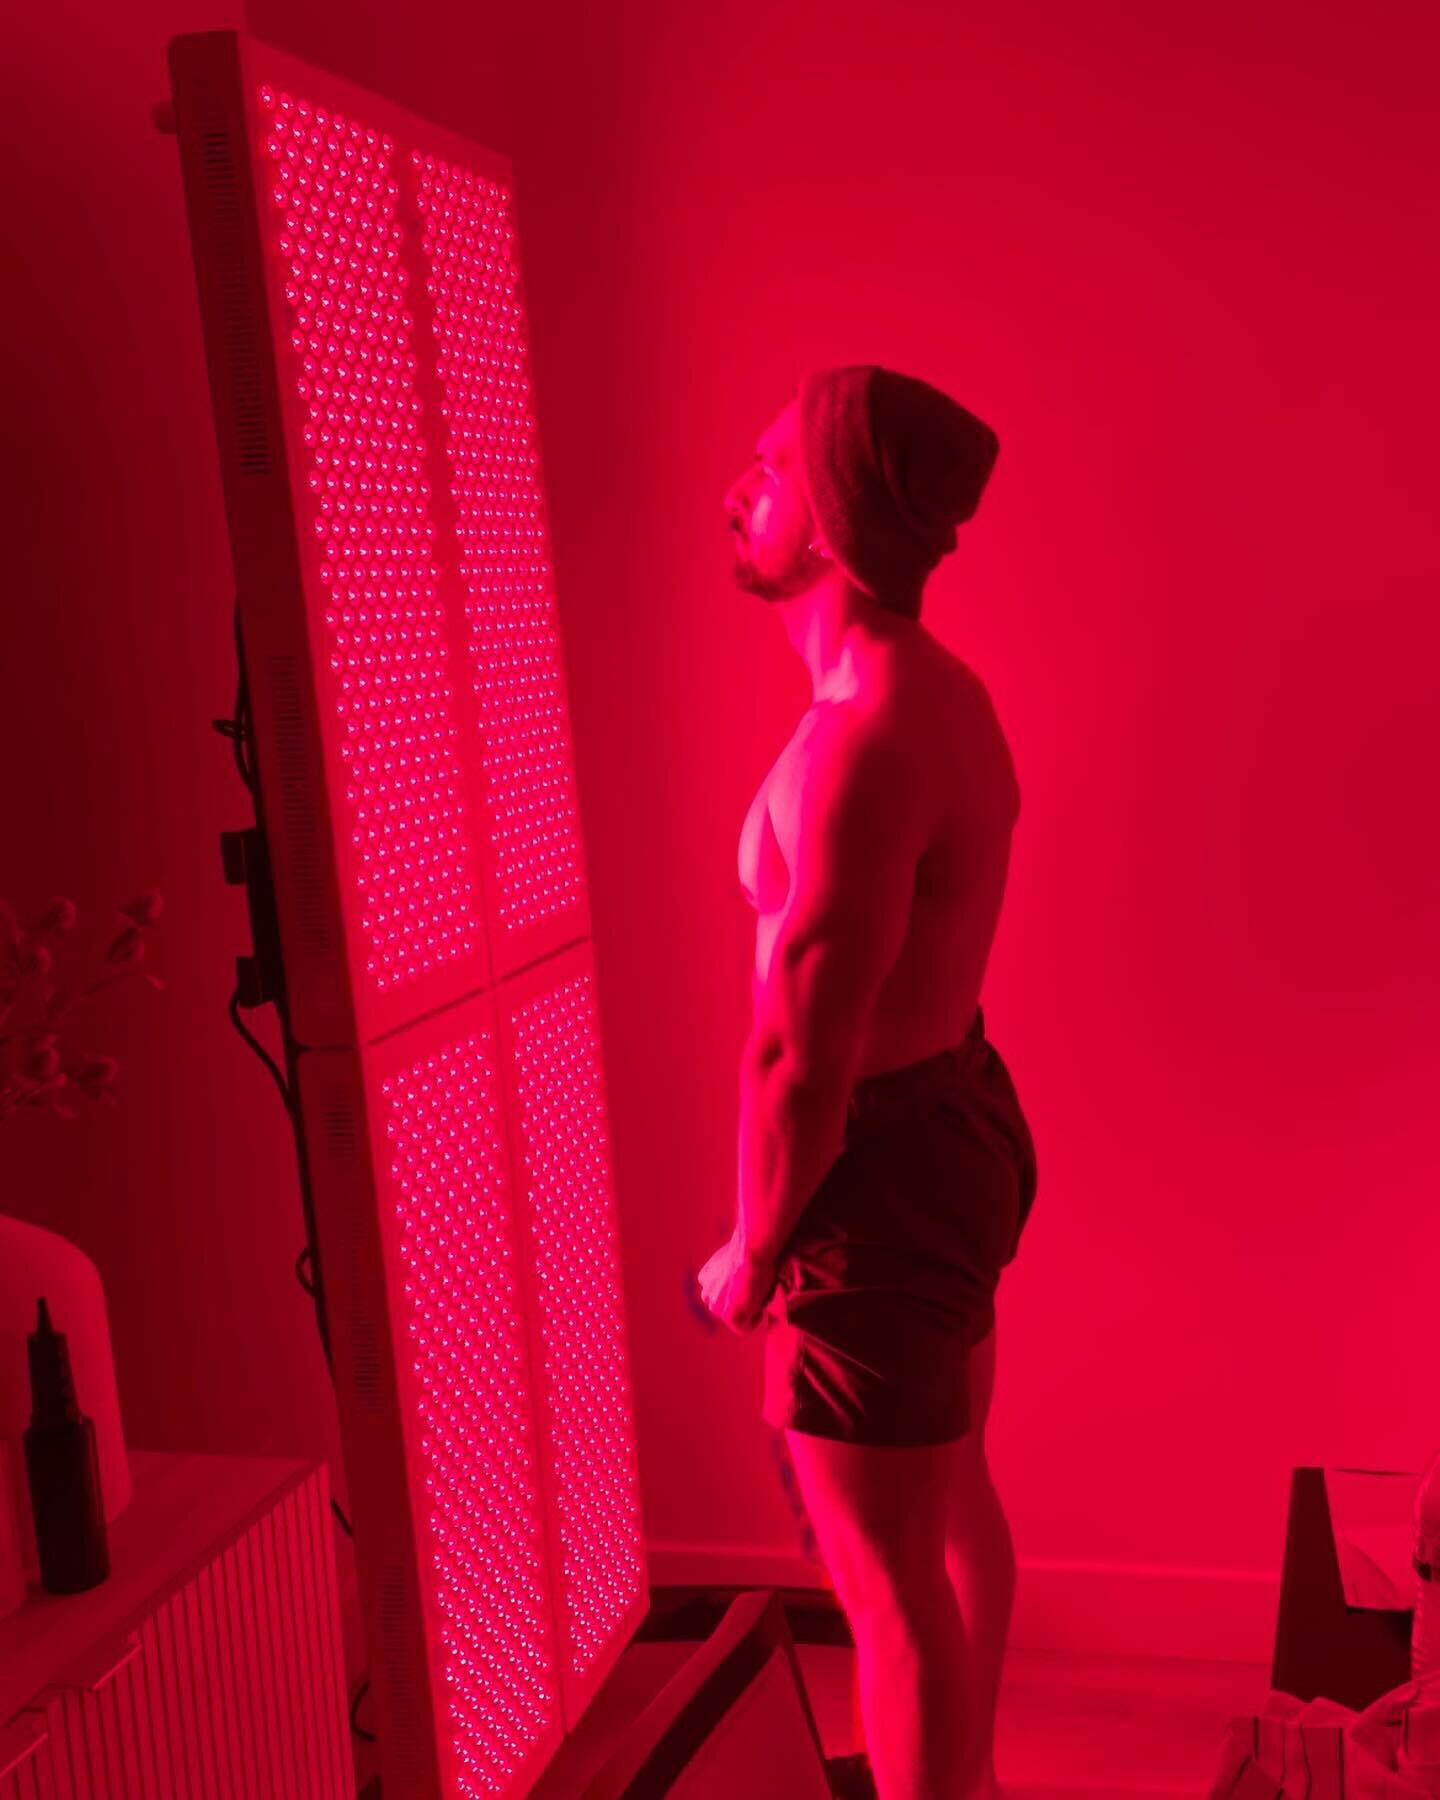 One of the most important factors while using Red Light Therapy is the amount of body coverage. Every cell in your body wants red and infrared light to express its greatest potential. In Nature, sunlight provides a low dose (slow charge) for your cel